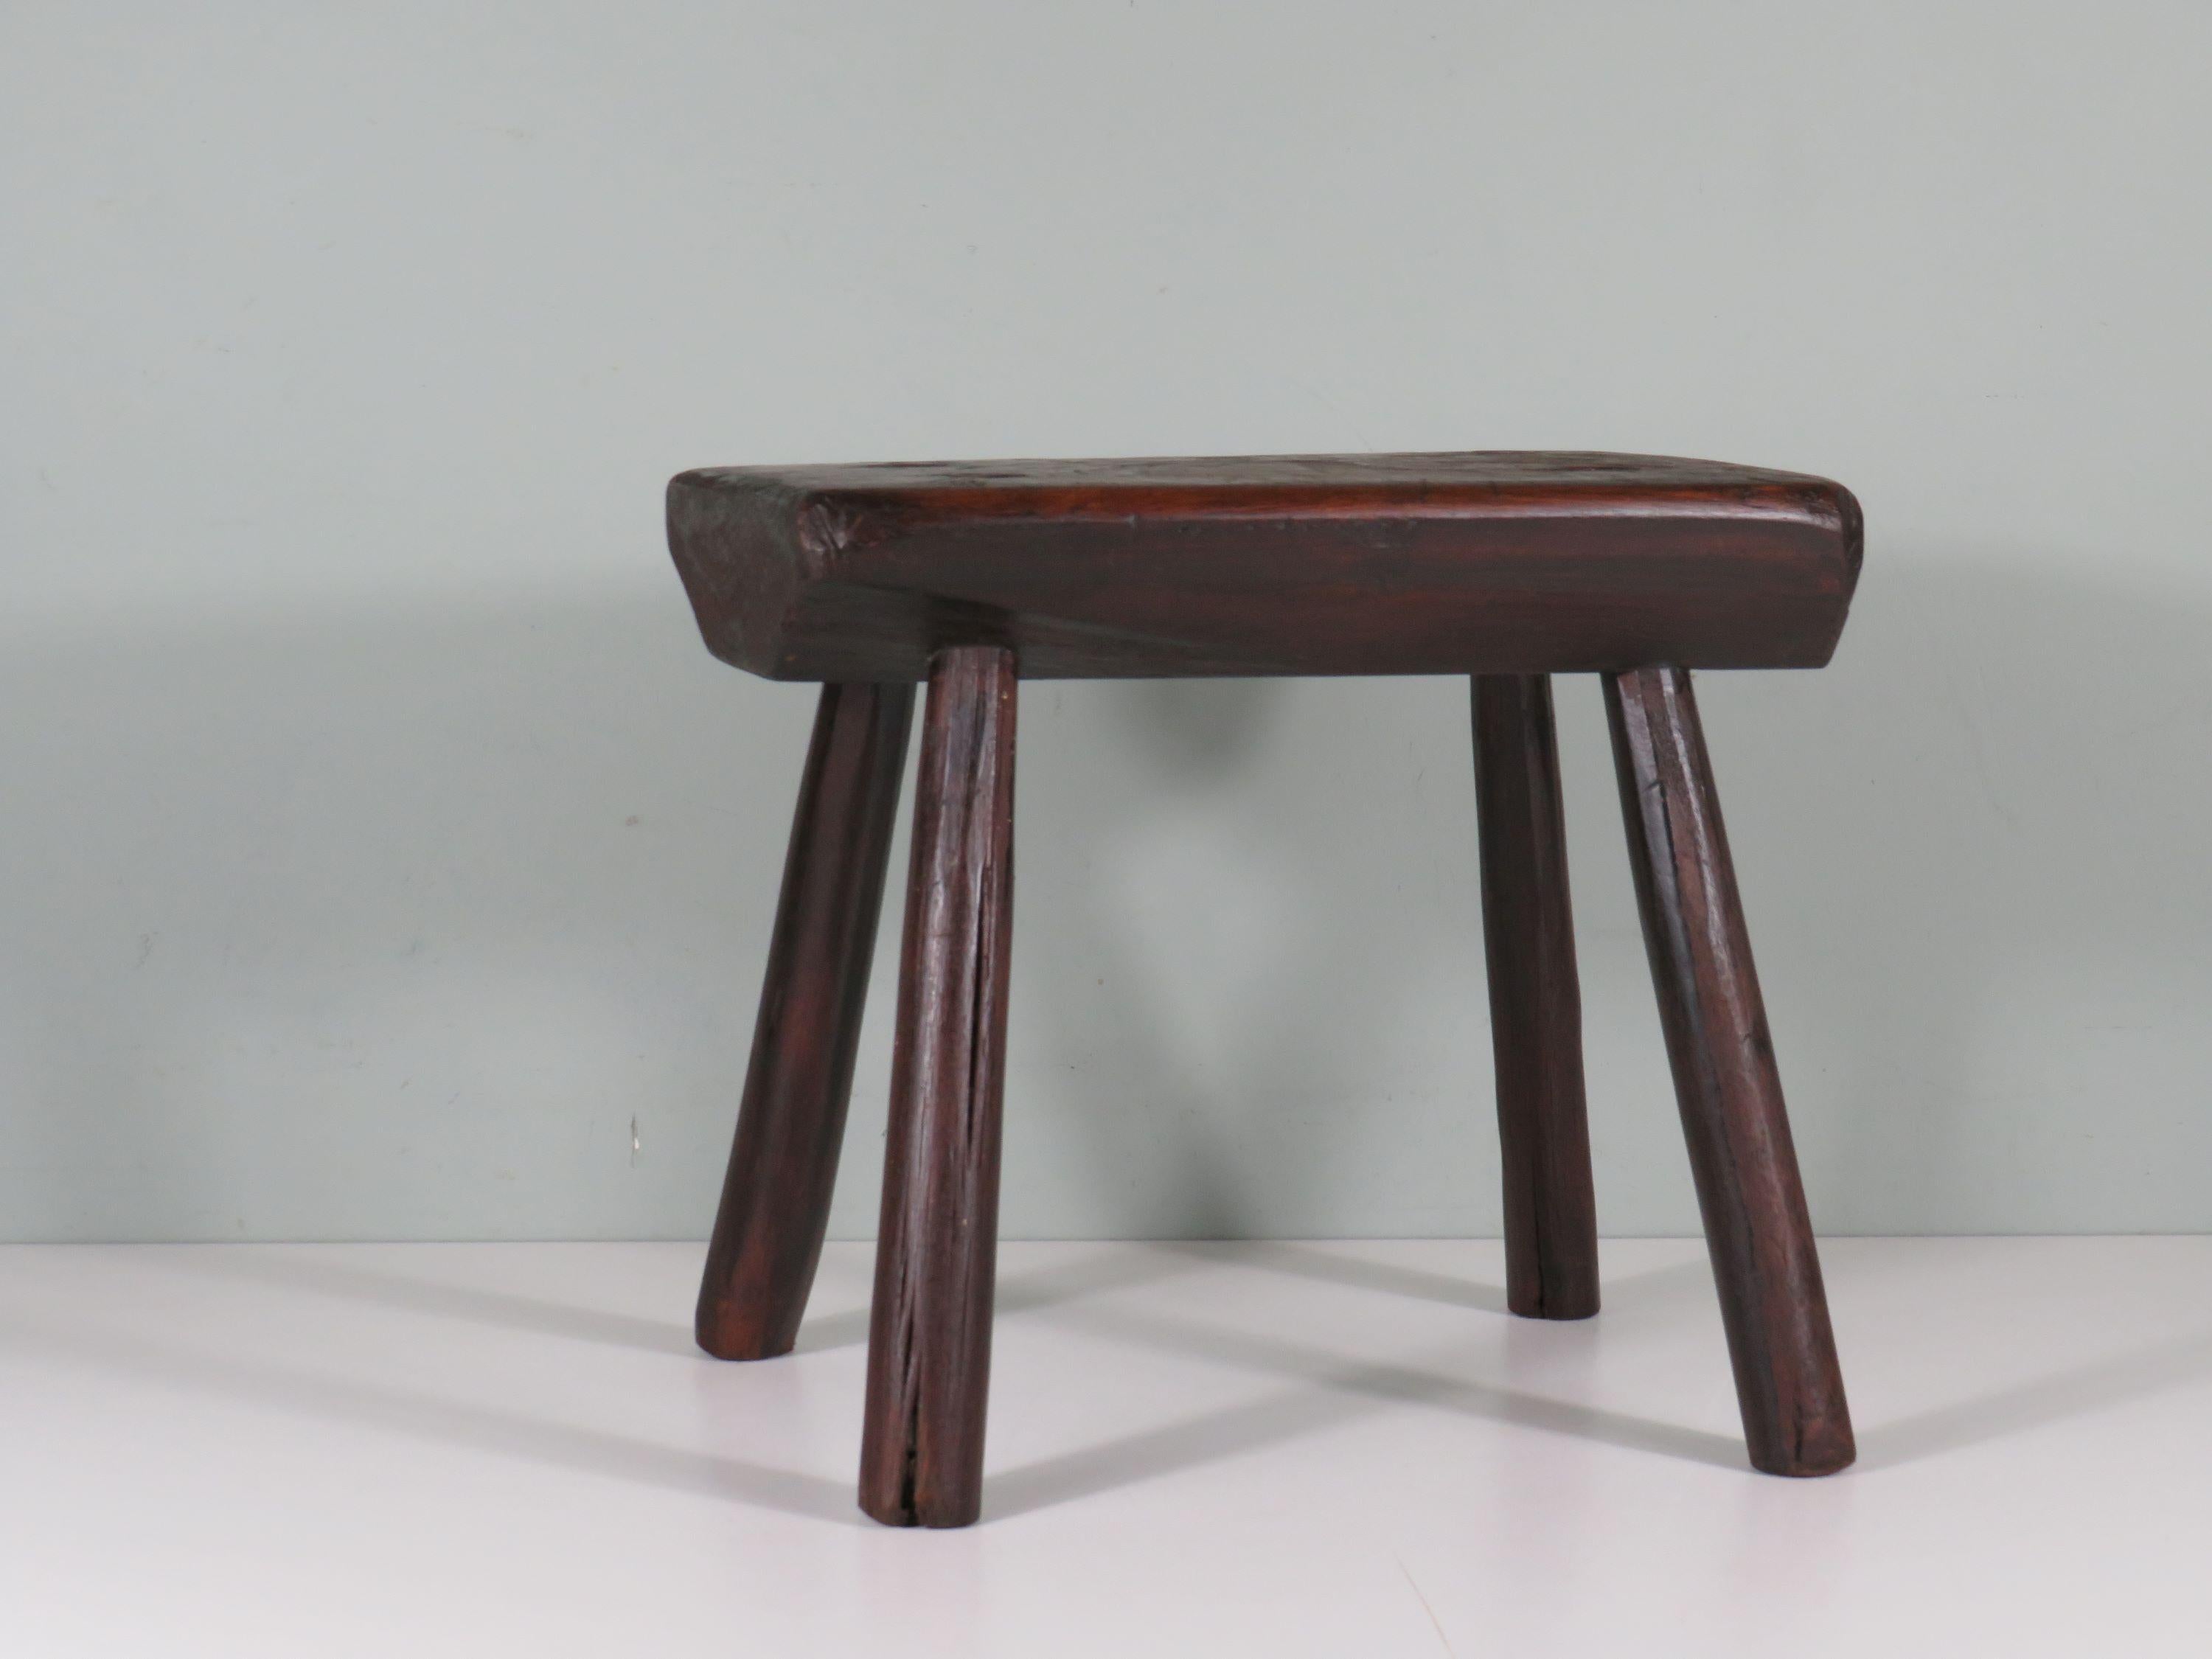 Mid century French low rectangular stool in dark oak with round legs that diverge downwards.
The handmade stool has a beautiful patina and is in sturdy condition.
The seat height of the stool is 32 cm, the seat measures 36 cm by 20 cm.